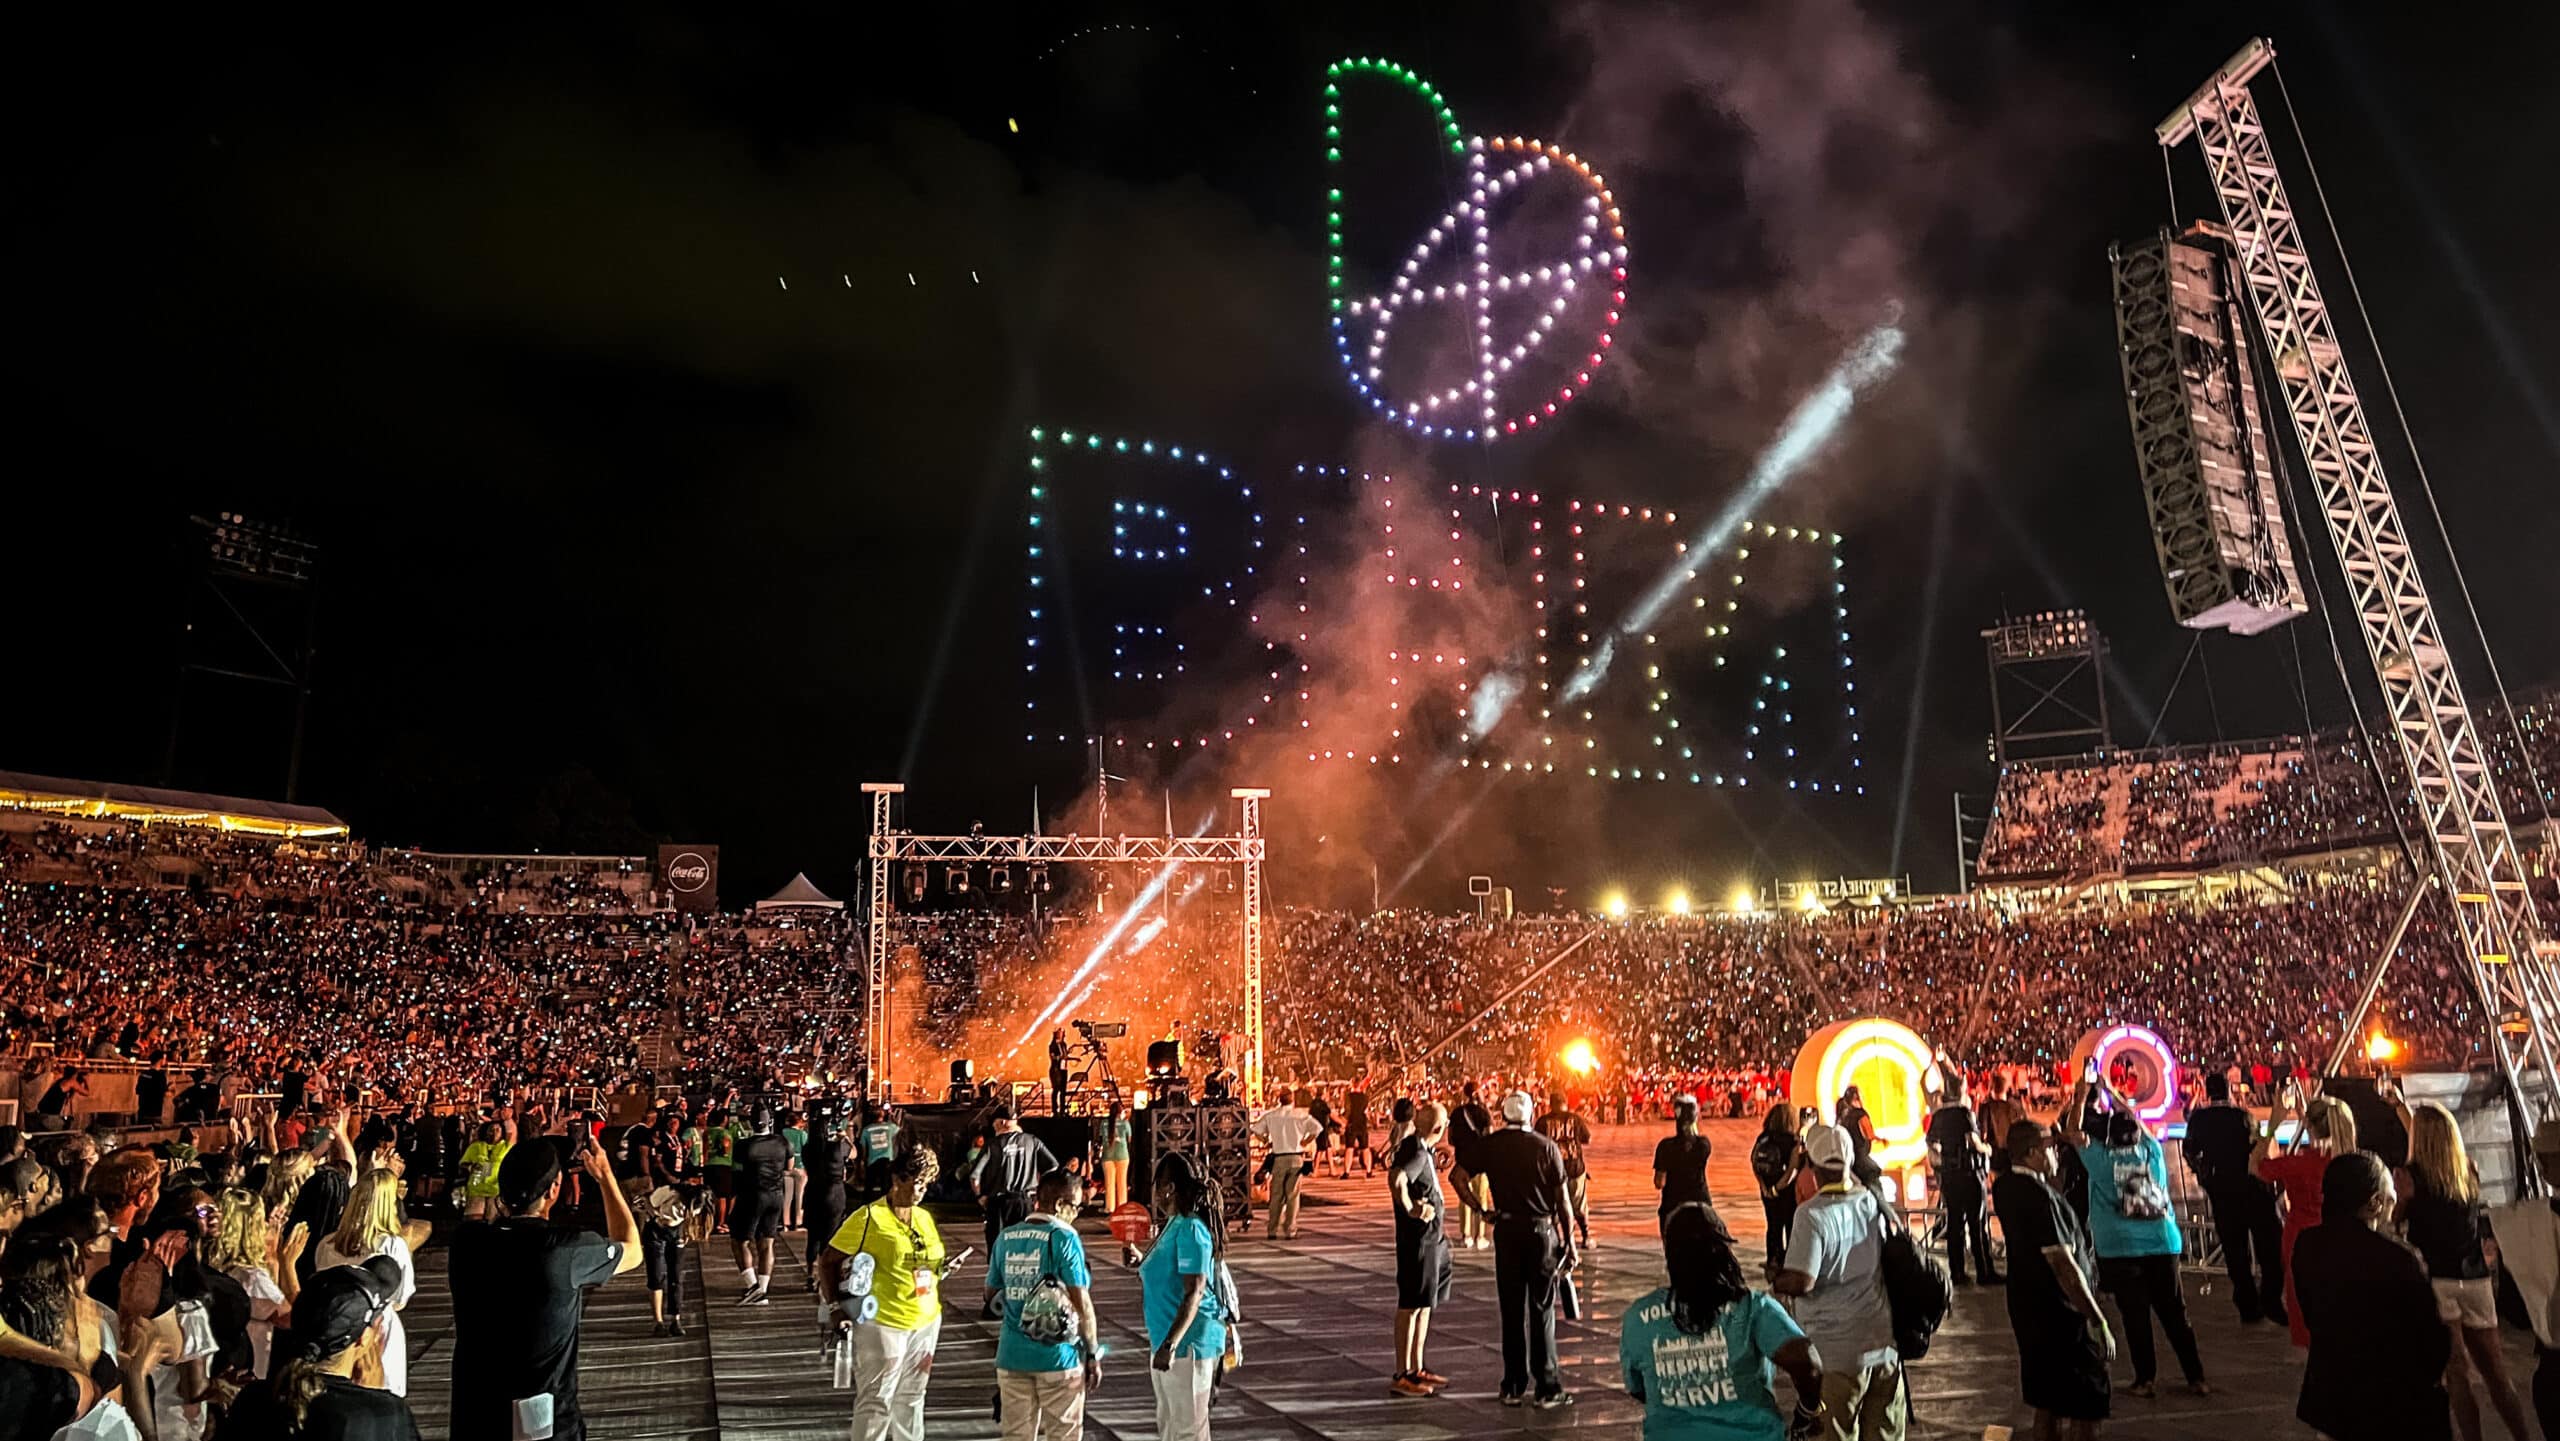 Panion's work for The World Games 2022 lands 19 wins in 44th